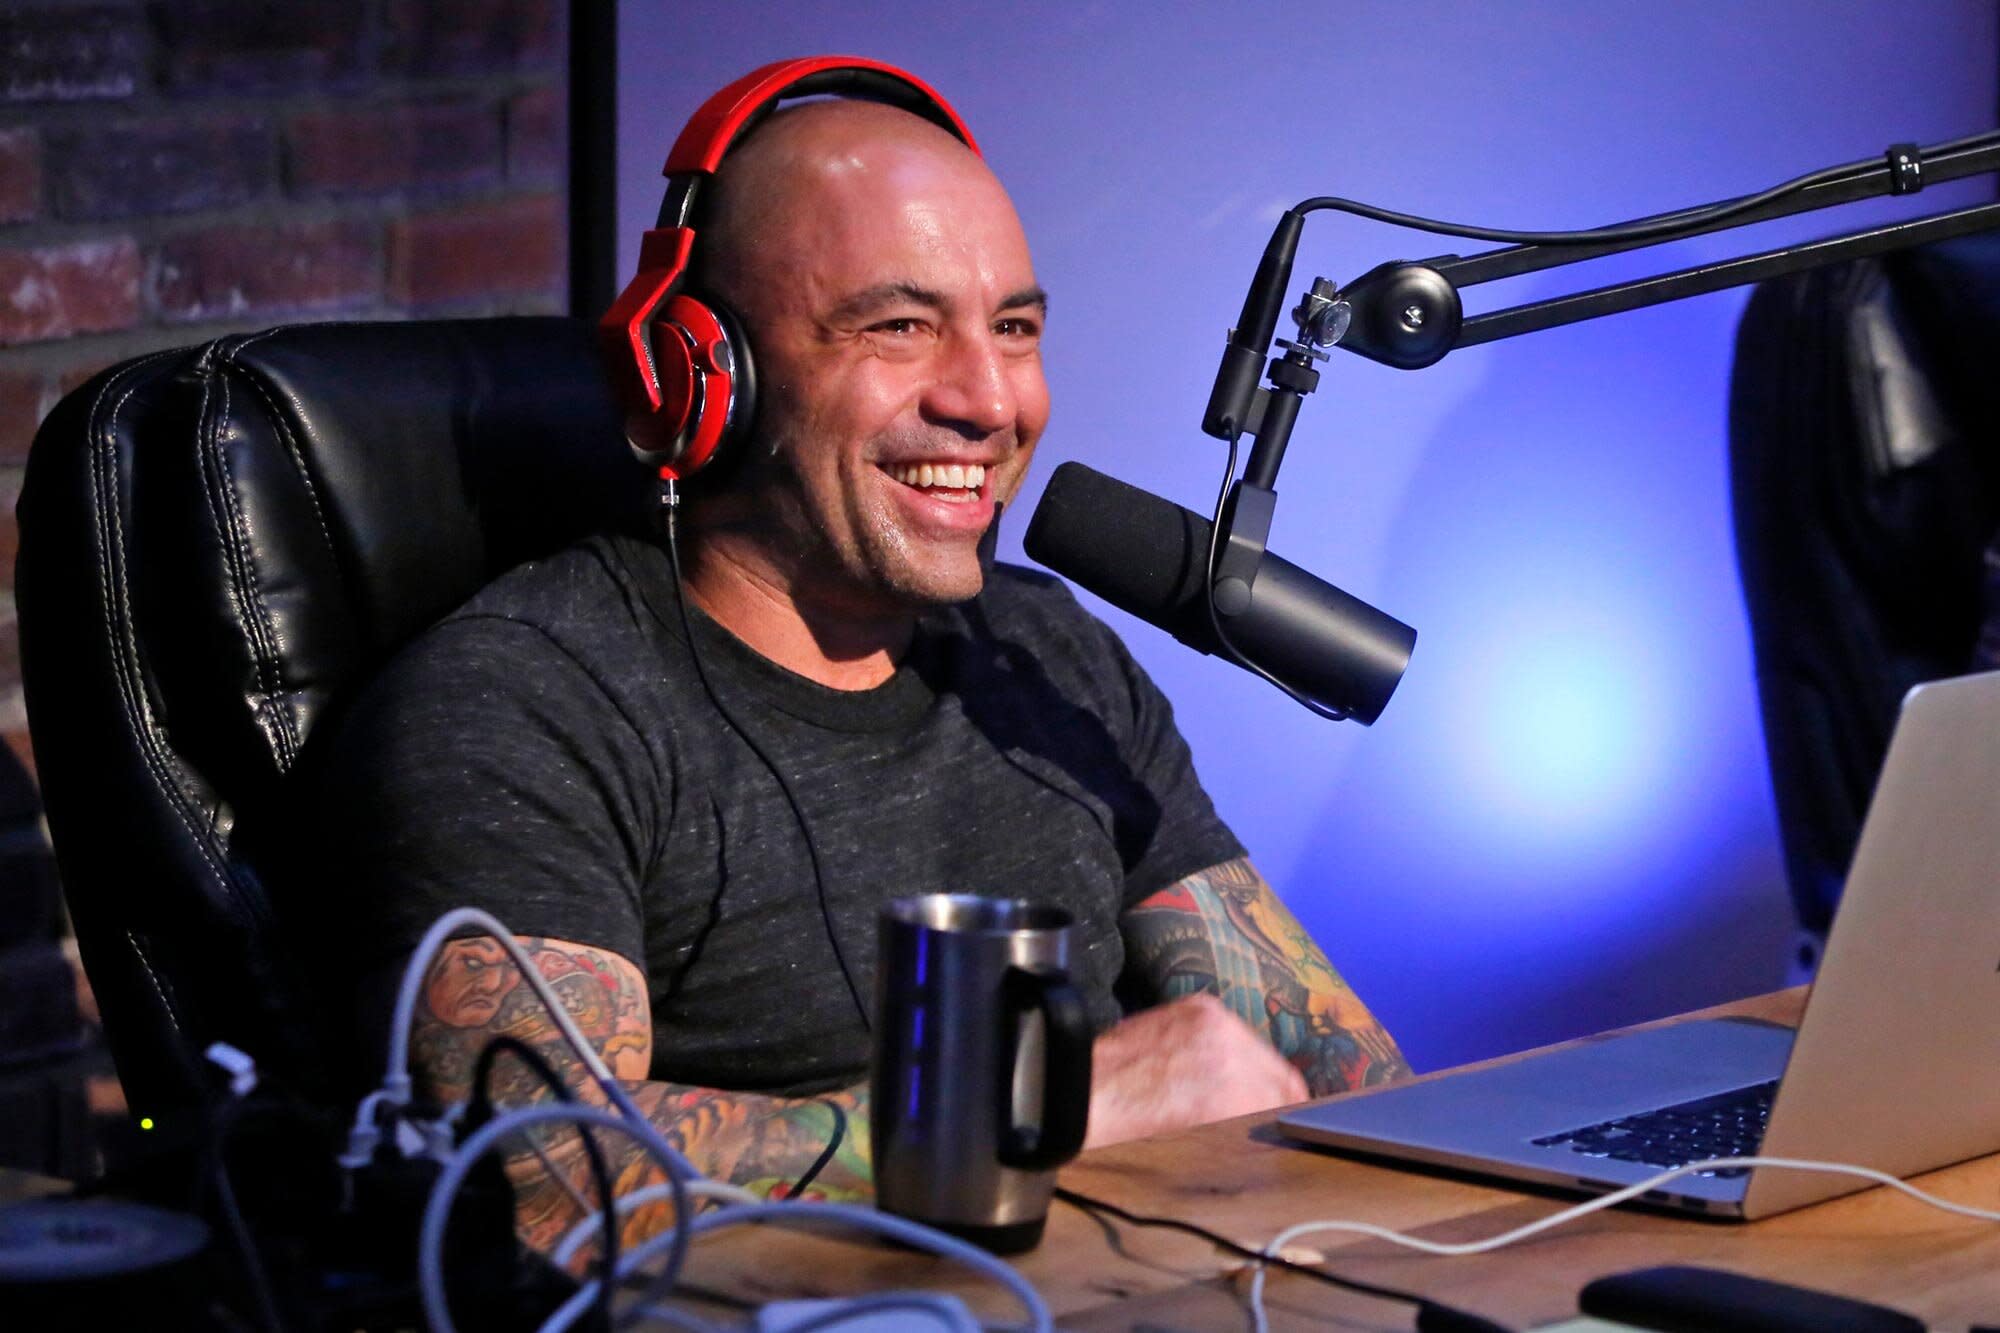 Joe Rogan debuts on Spotify with his most controversial